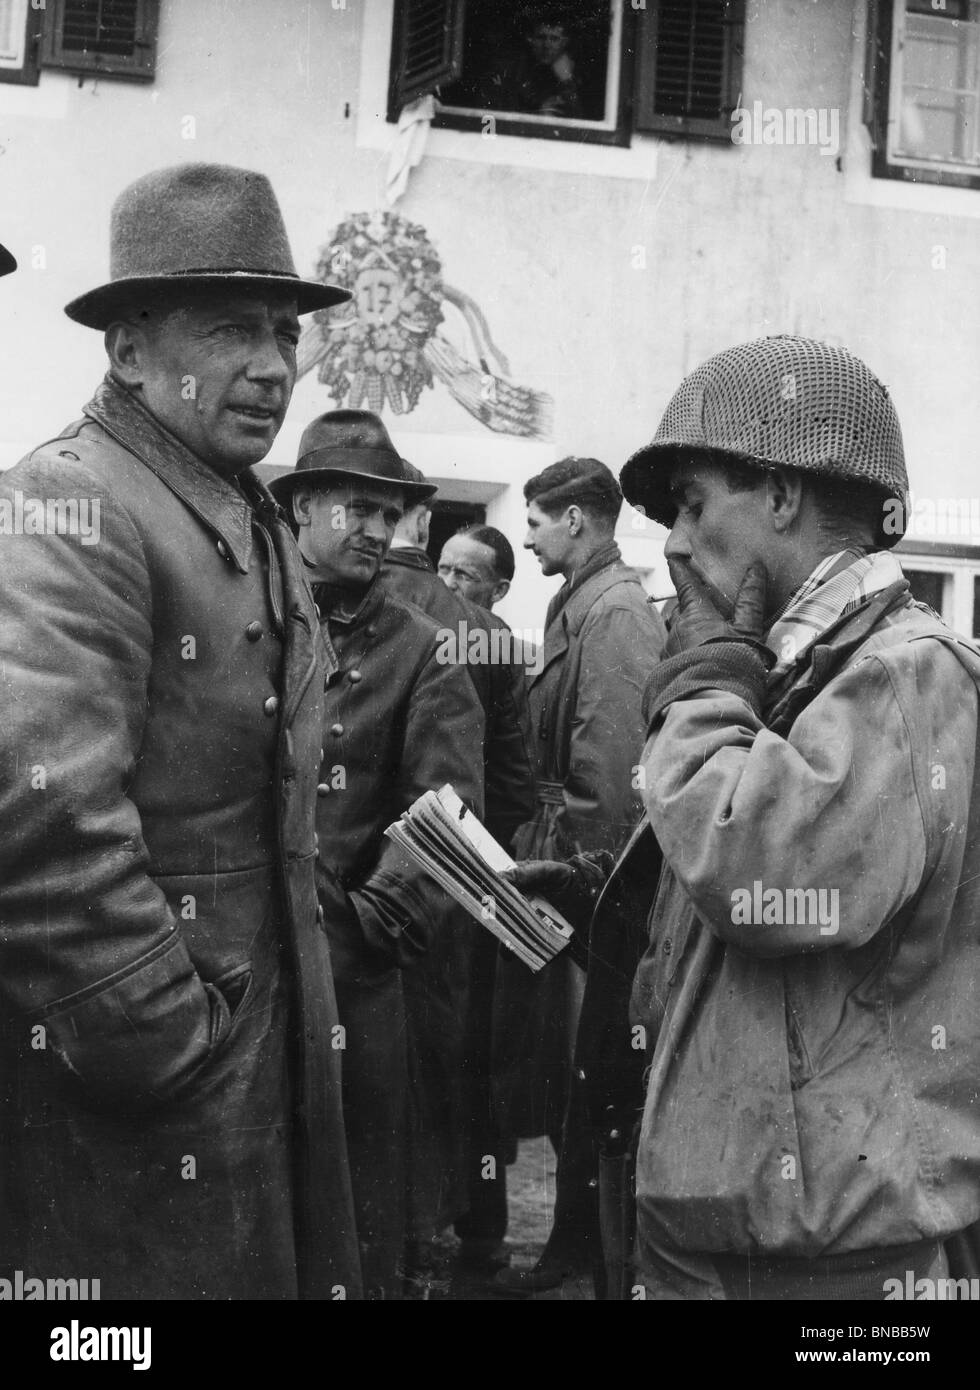 WALTER DORNBERGER, Commandant of the  Peenemunde Station on 2 May 1945 after capture by US forces at Schattwald in Austria. Stock Photo